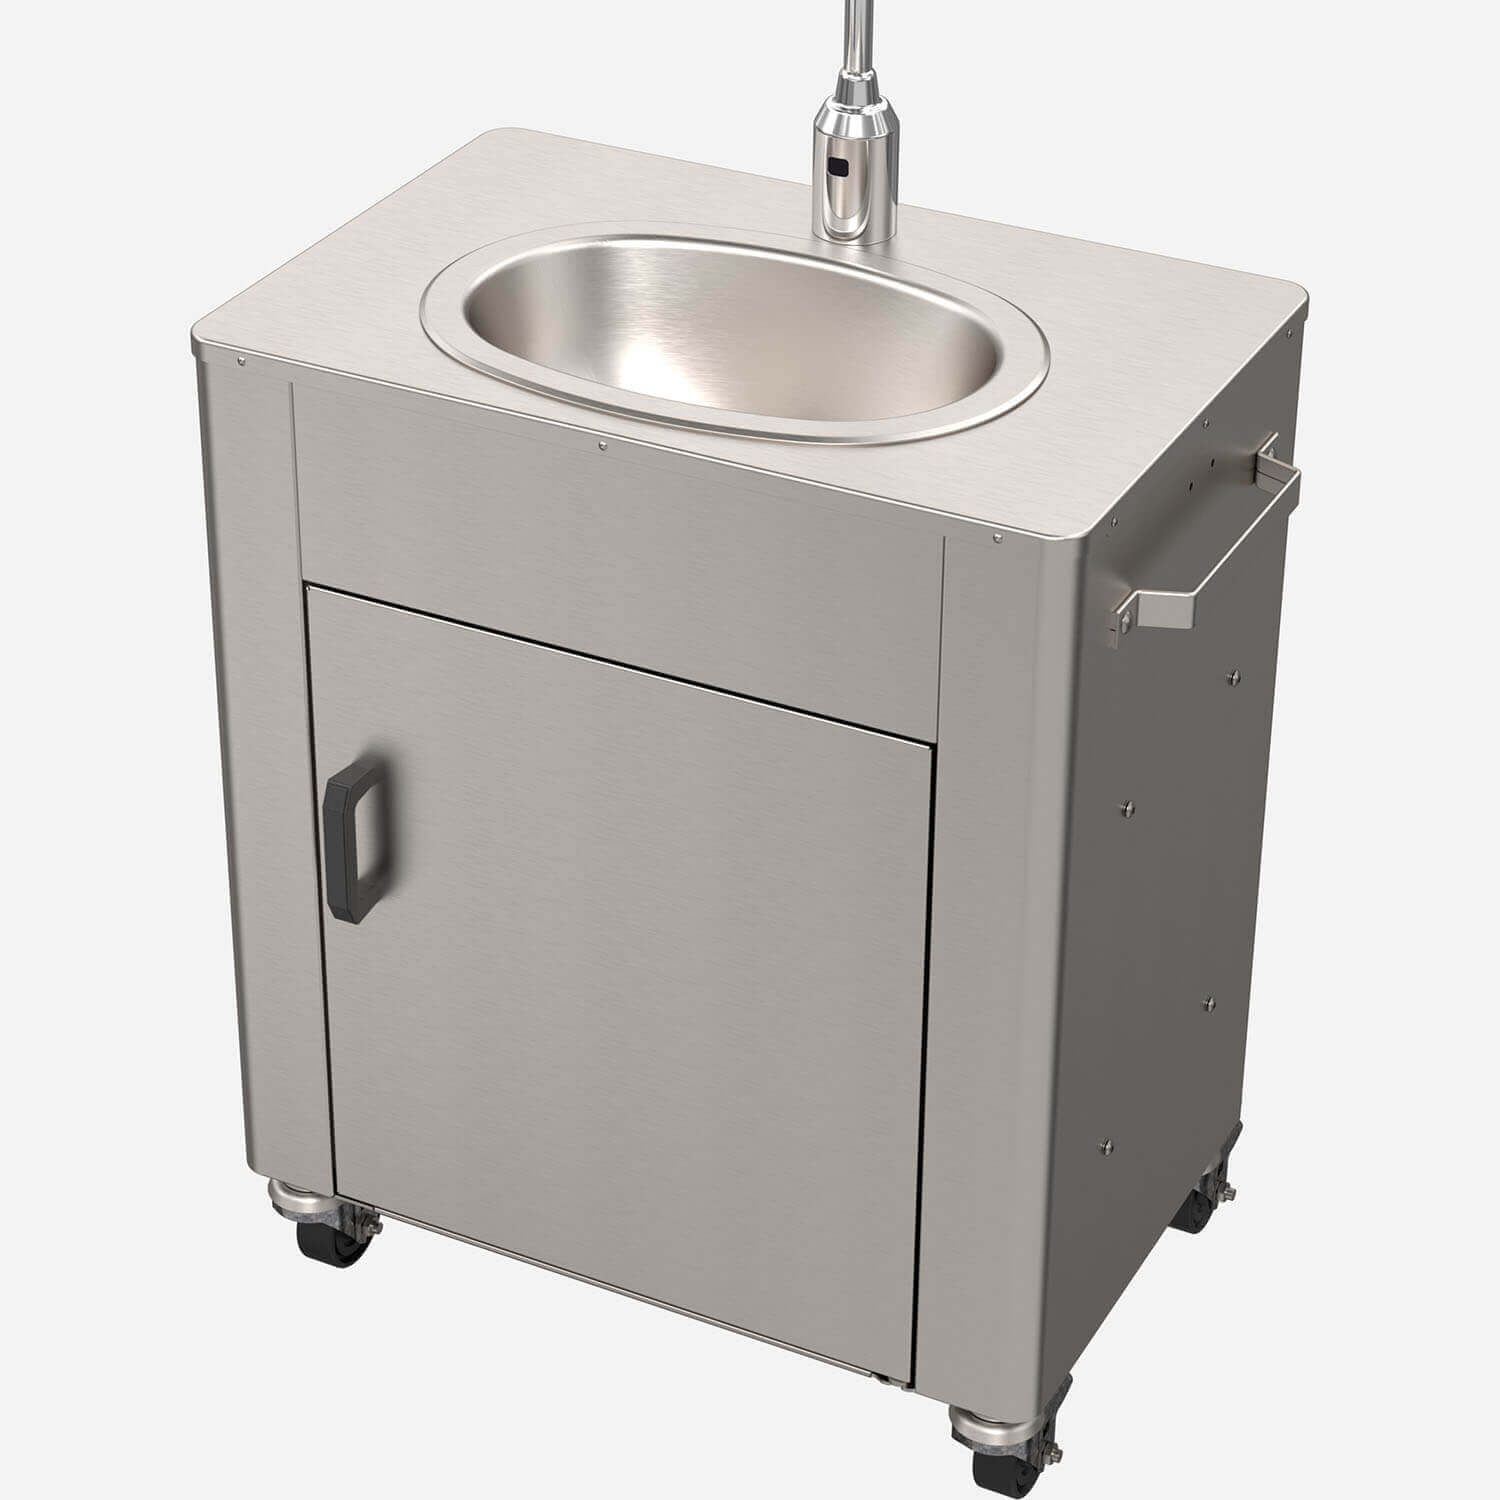 Portable Sink, Foot Pump-Operated - Deluxe Wash-Ware® Hand Washing Station  - Acorn Engineering